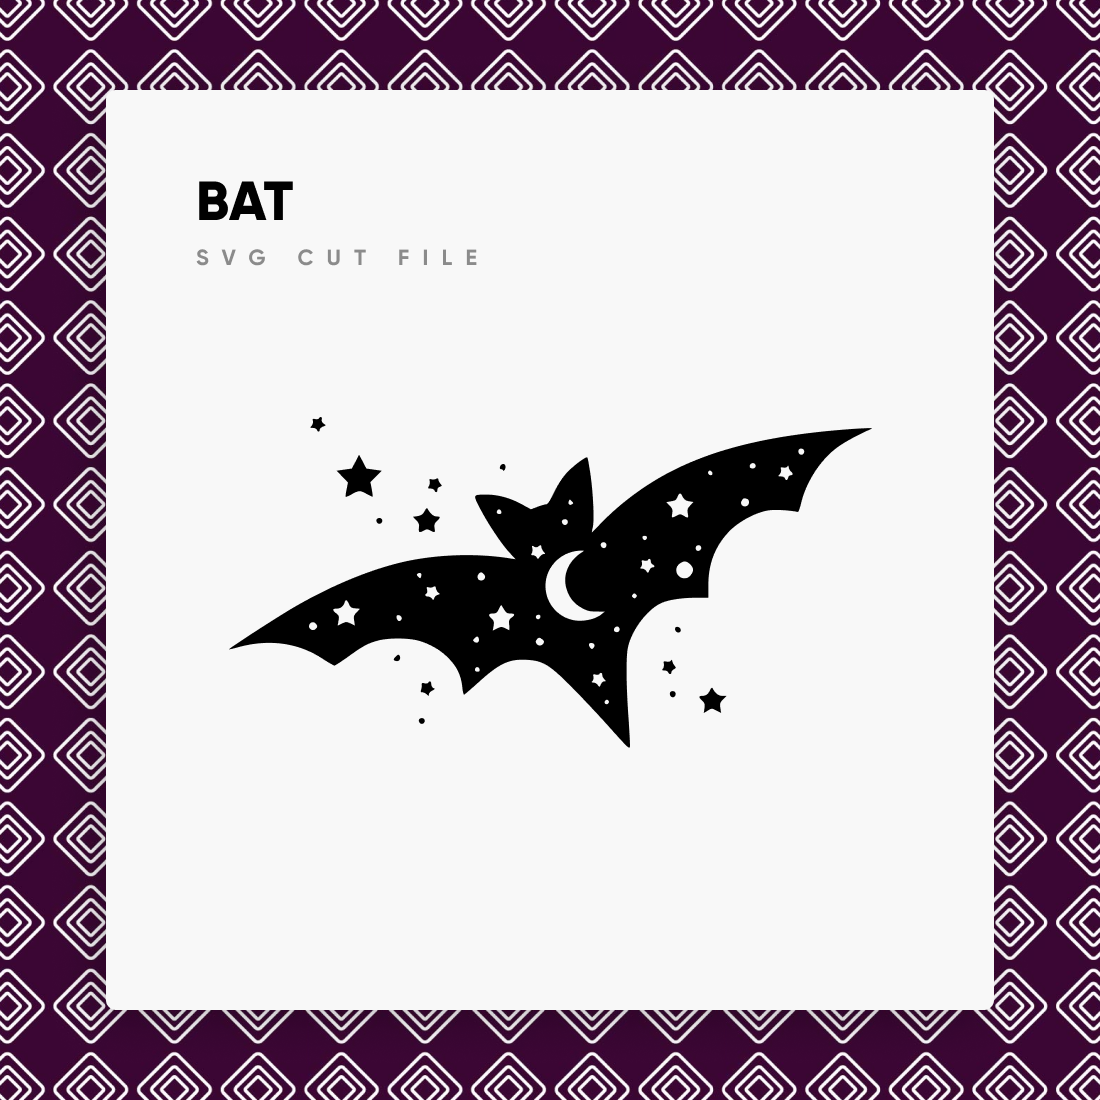 Bat flying through the air with stars on it.